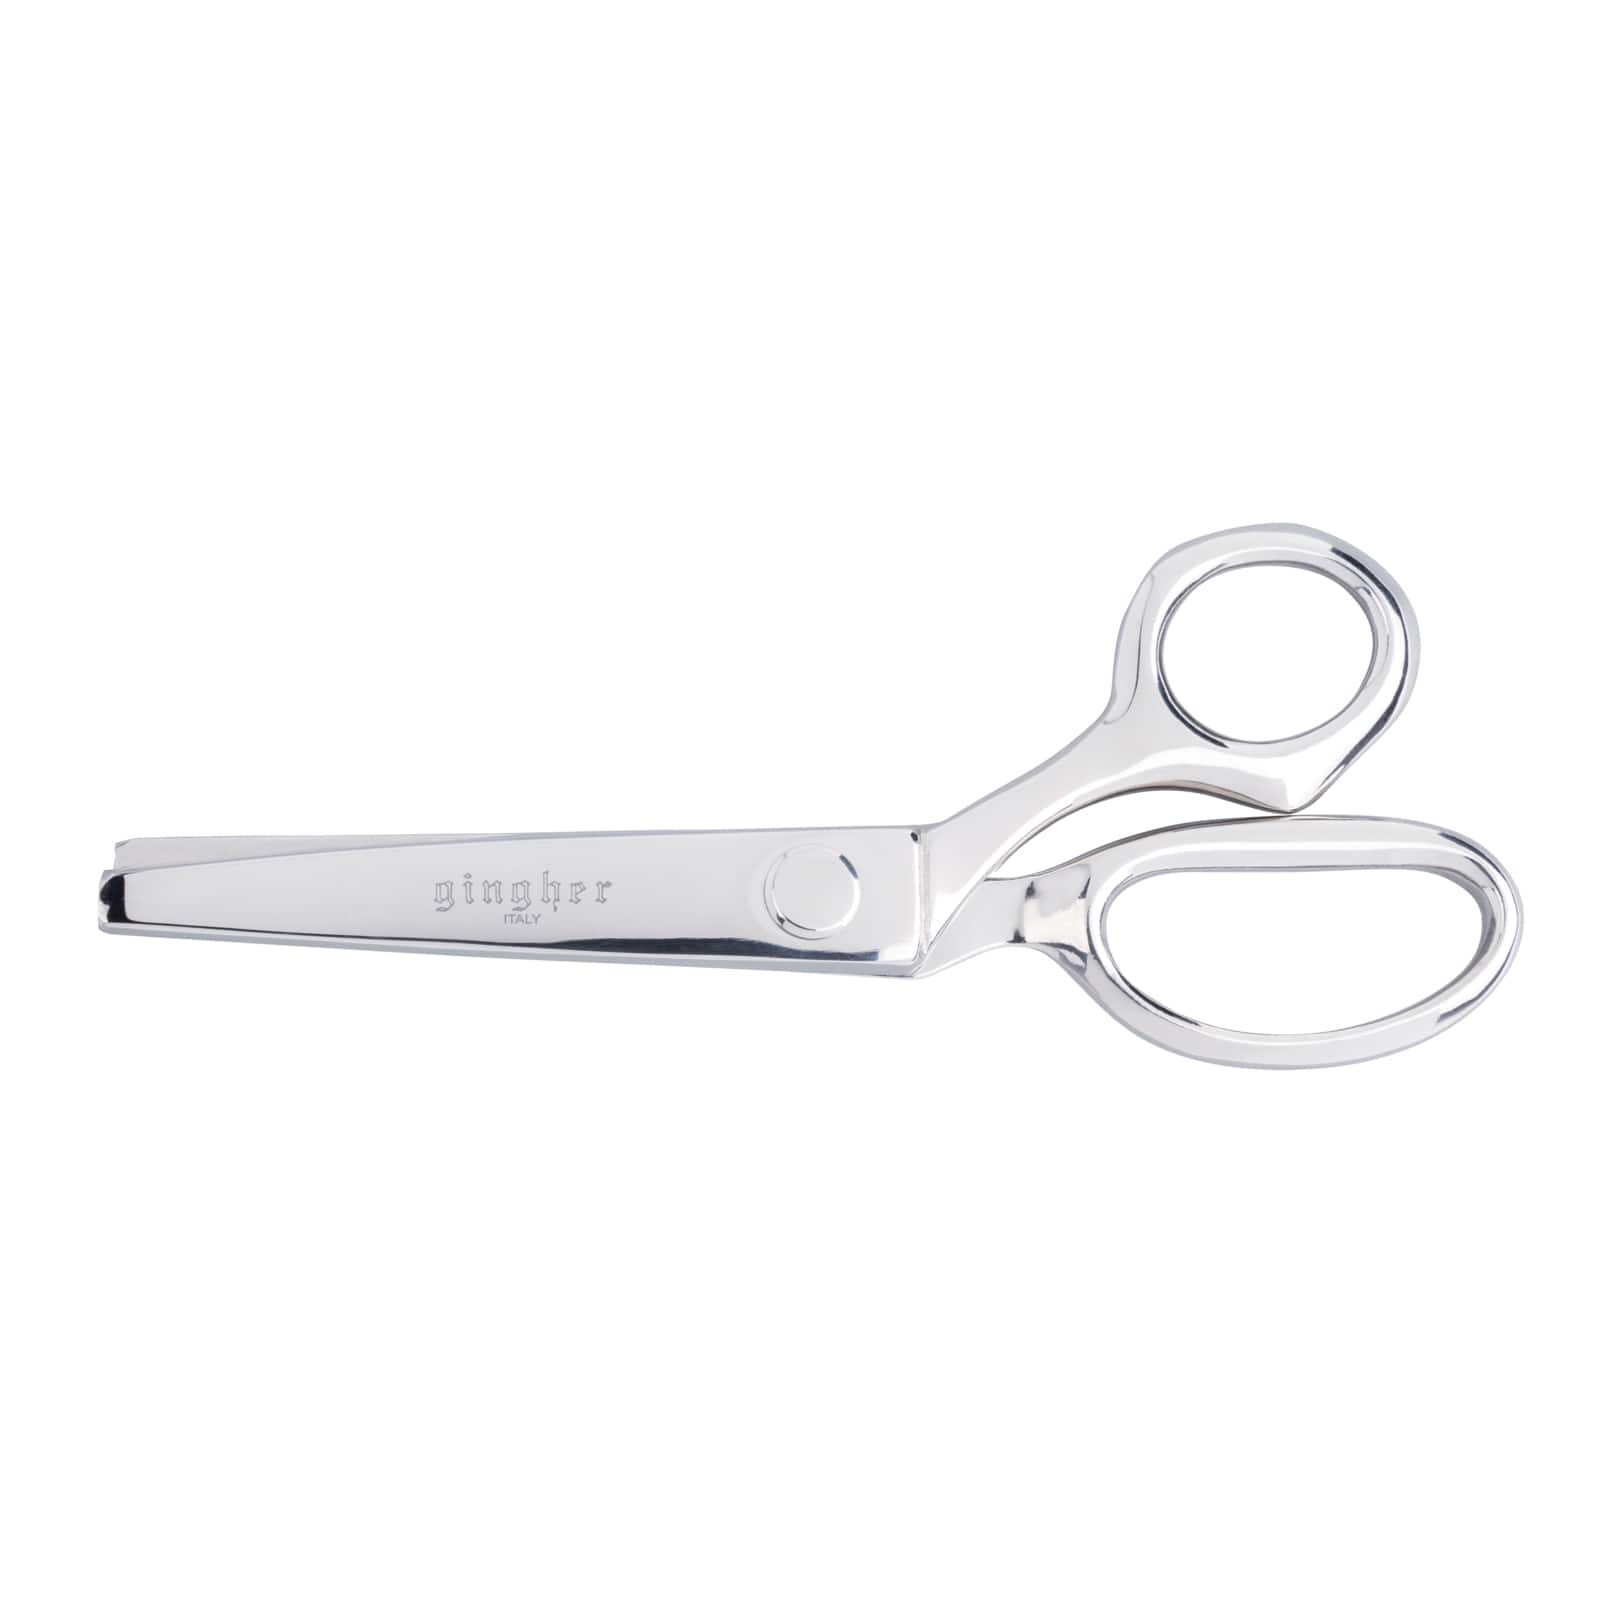 How to Use Pinking Shears